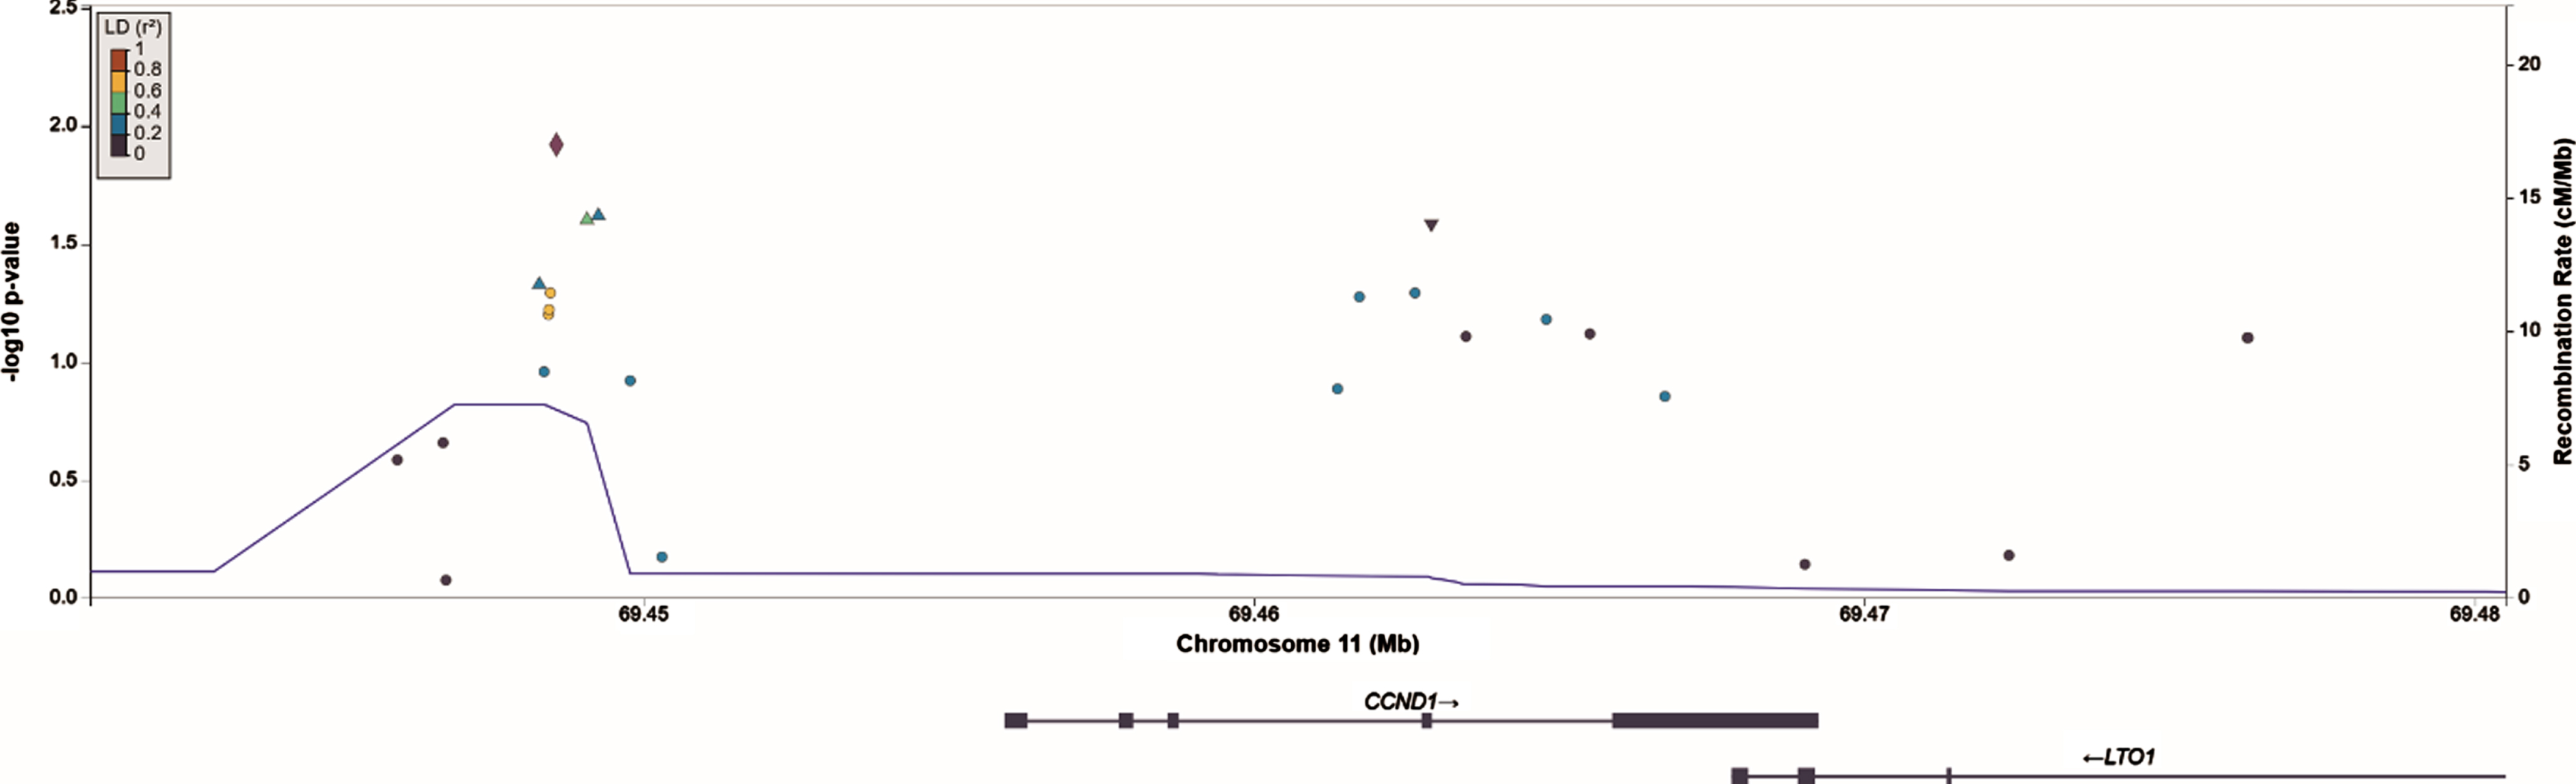 Regional association plot of SNPs in and nearby CCND1 constructed in LocusZoom. The SNP in CCND1 that shows the strongest association with NMIBC recurrences, rs655089, is marked by the purple diamond.